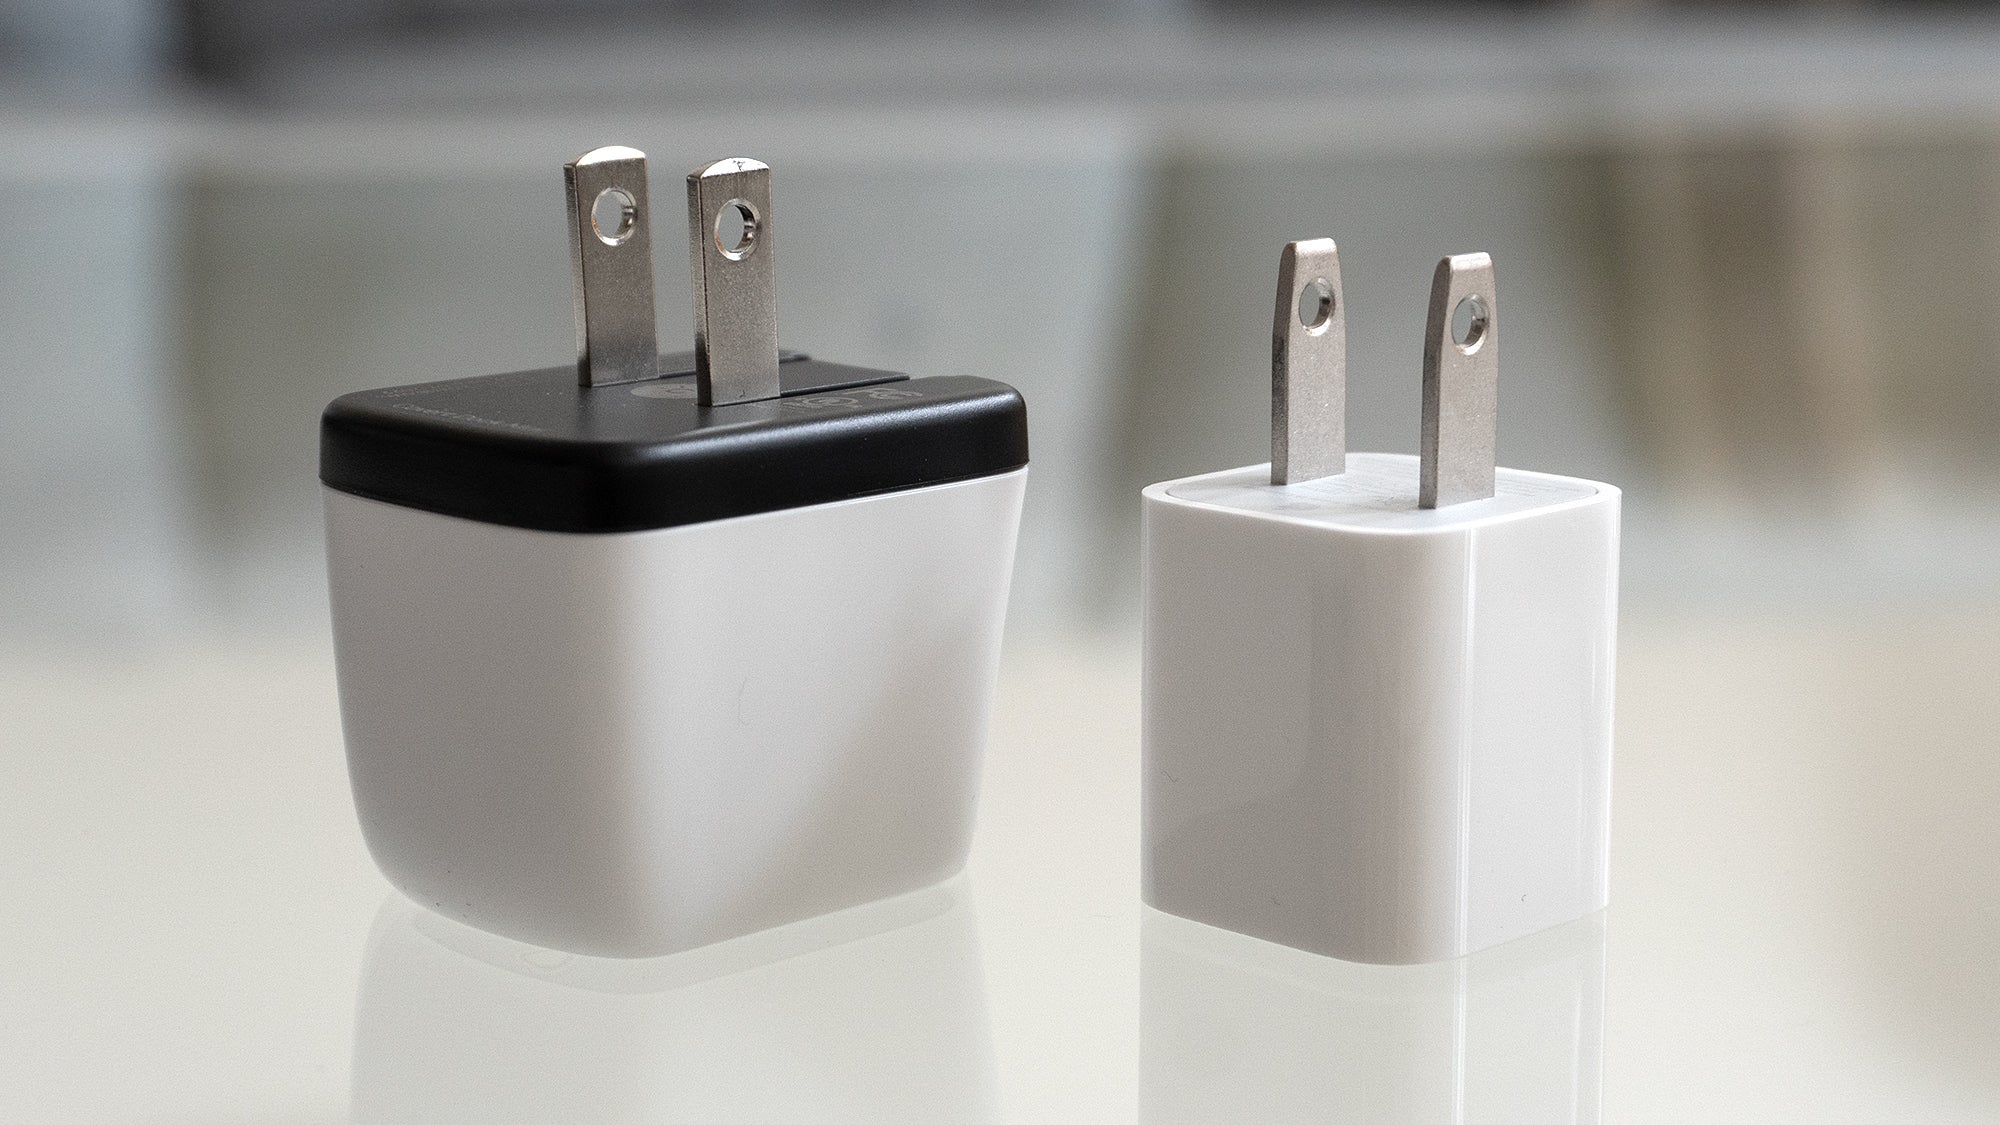 The Genki Covert Dock Mini is not much bigger than the 5W charger Apple used to ship with iPhones. (Photo: Andrew Liszewski | Gizmodo)